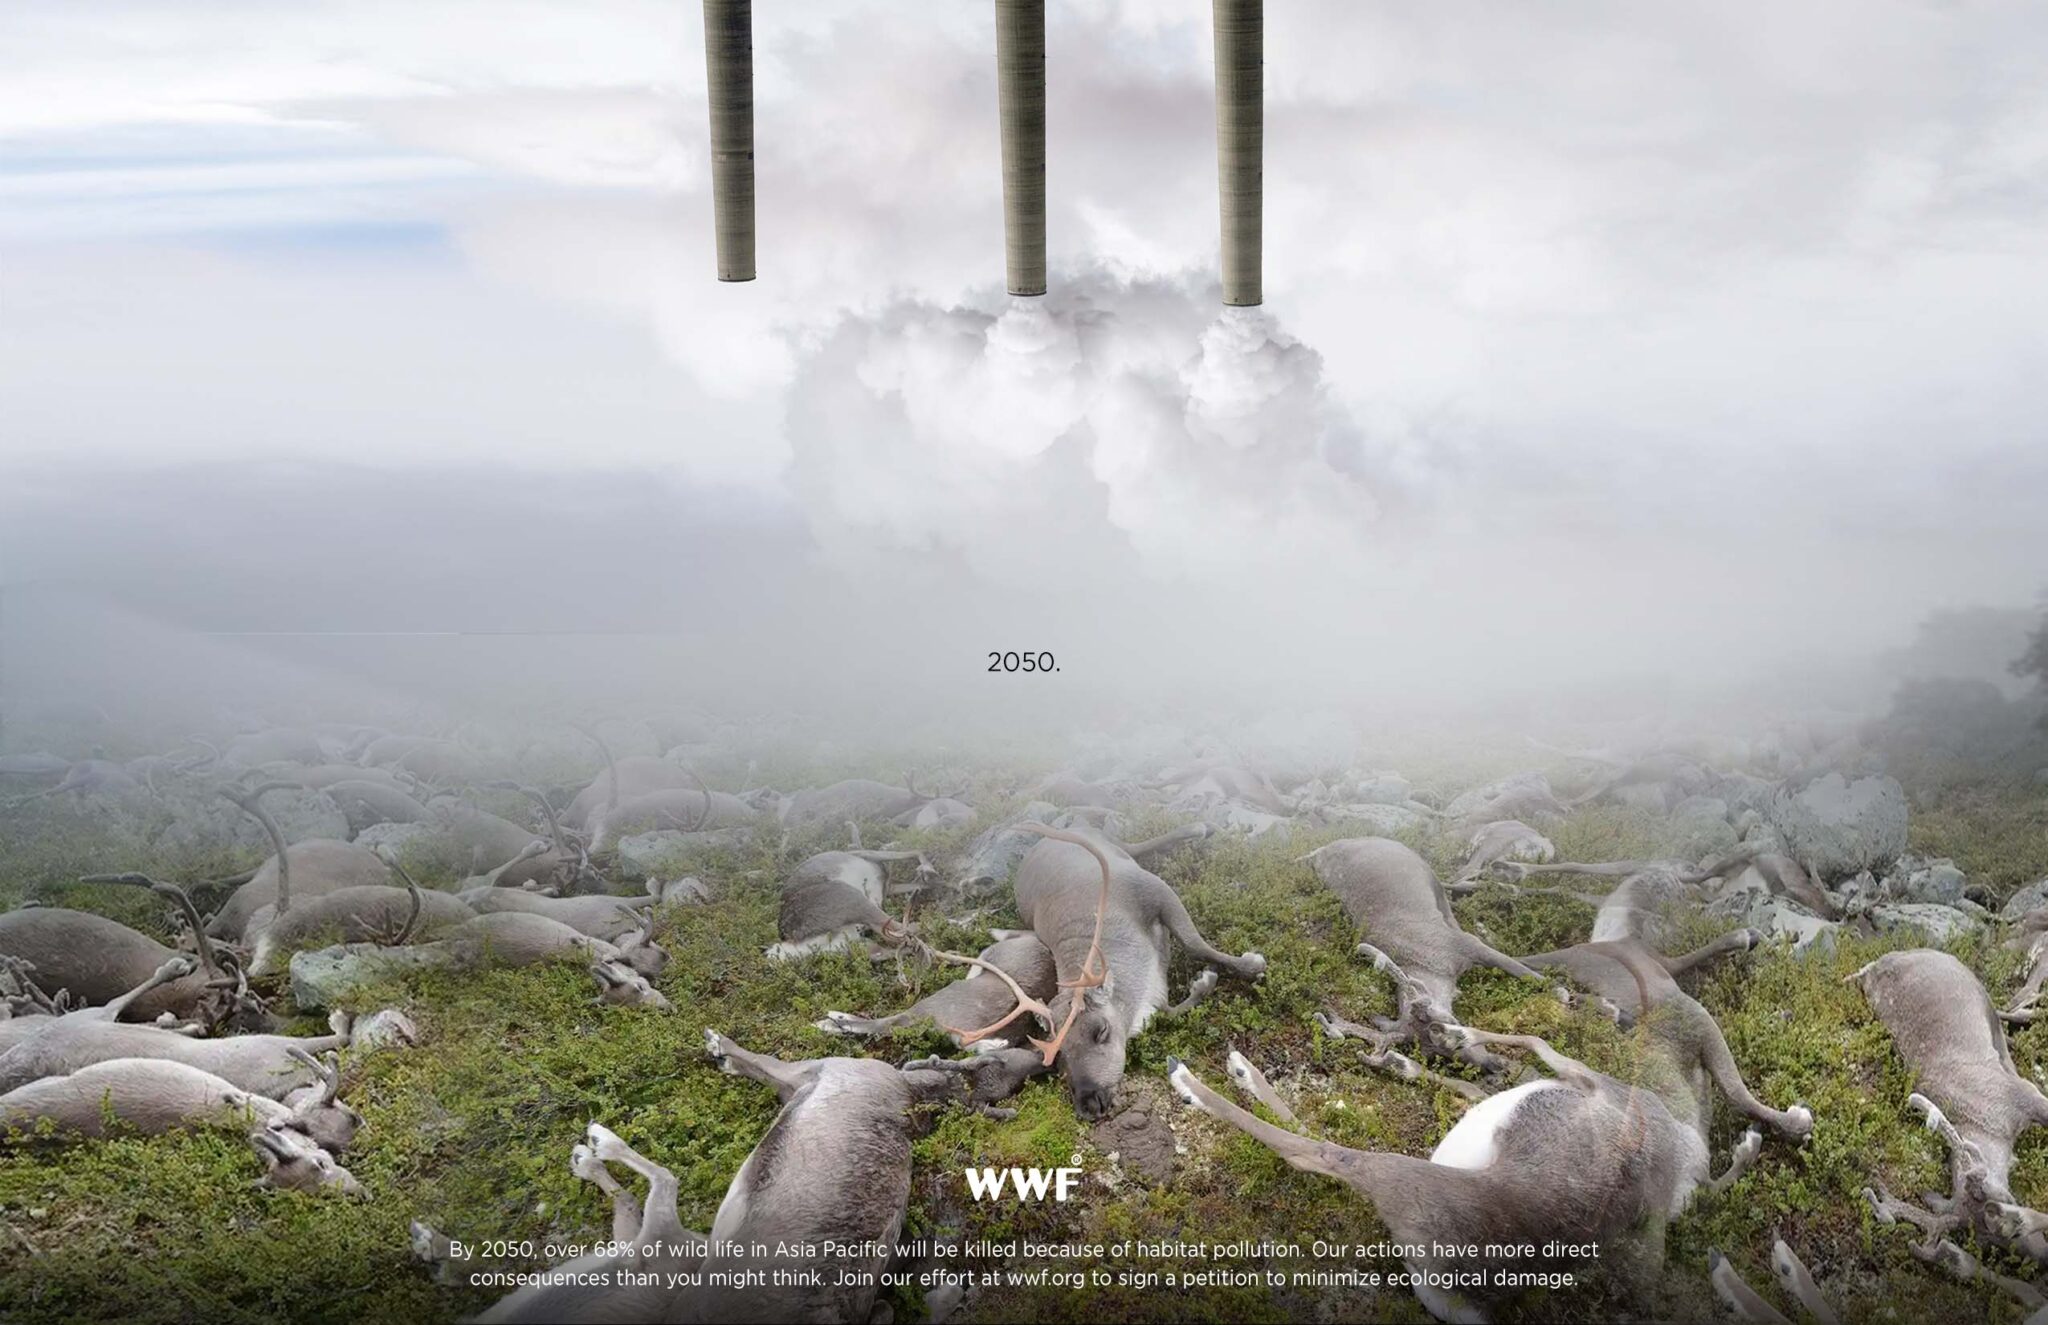 Elk lie dead in a field while smoke stacks produce pollution in the background.